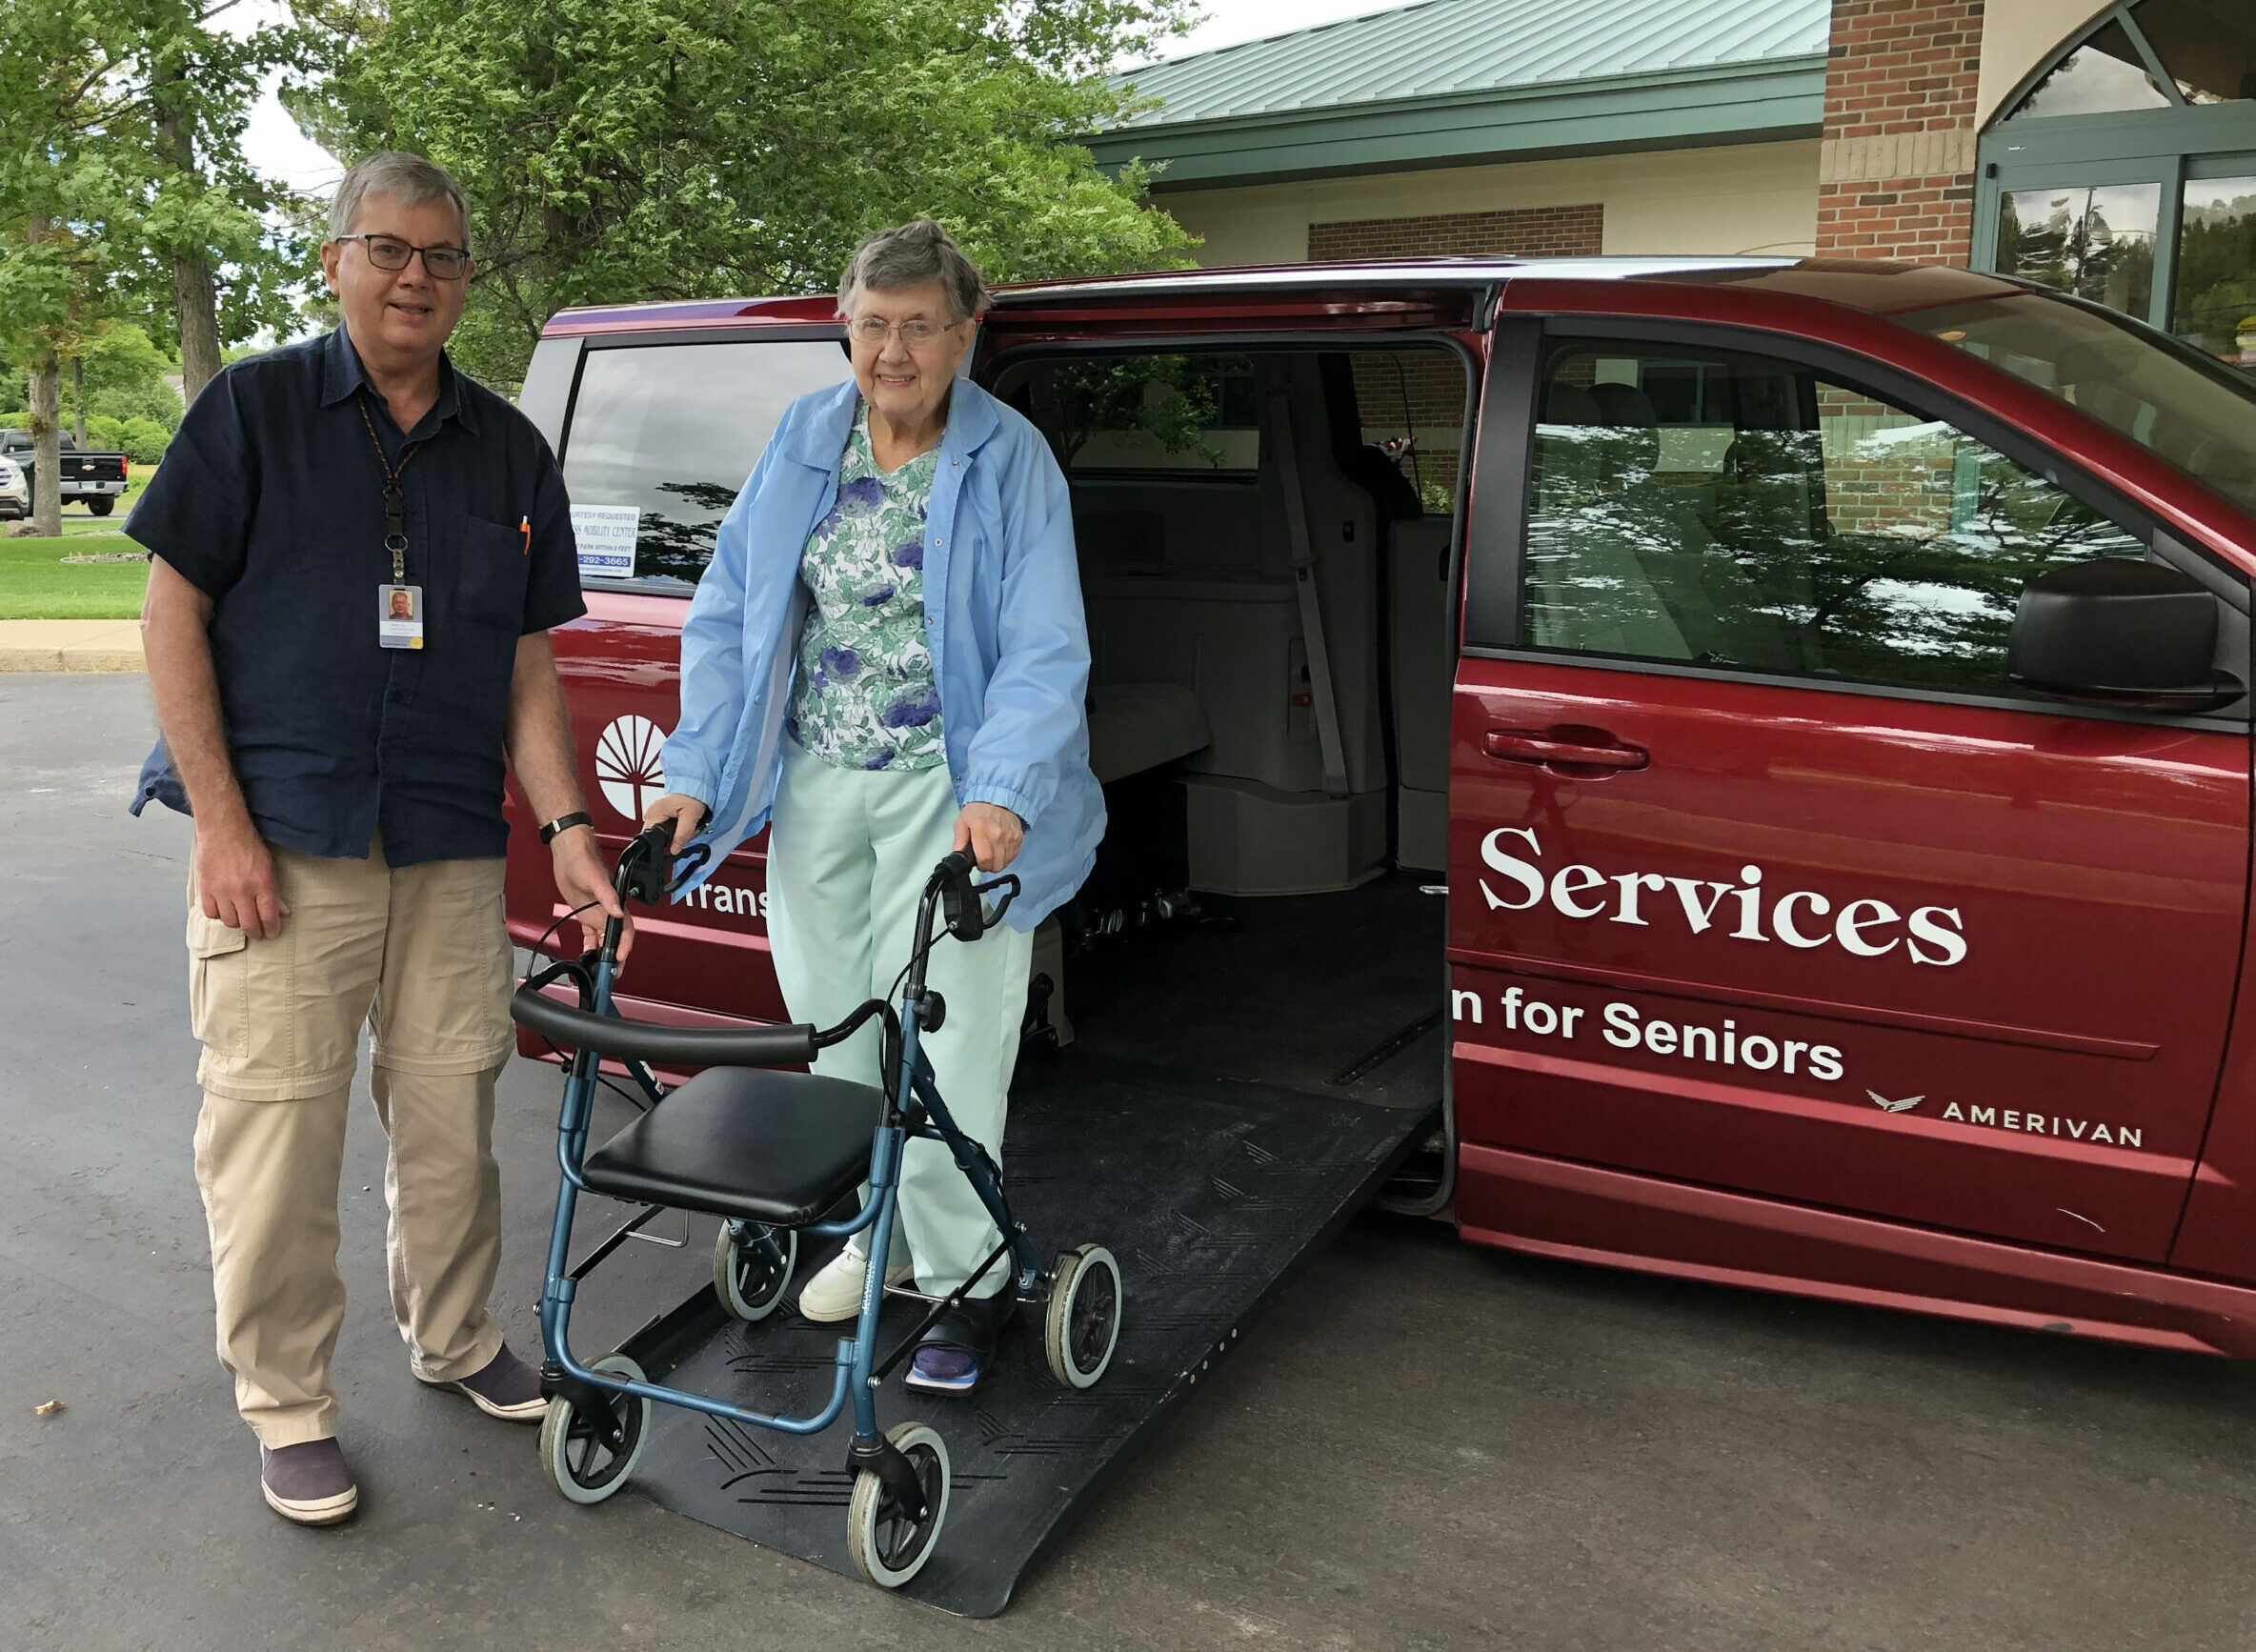 Transportation volunteer driver from Senior Services assists a client getting out of a vehicle.